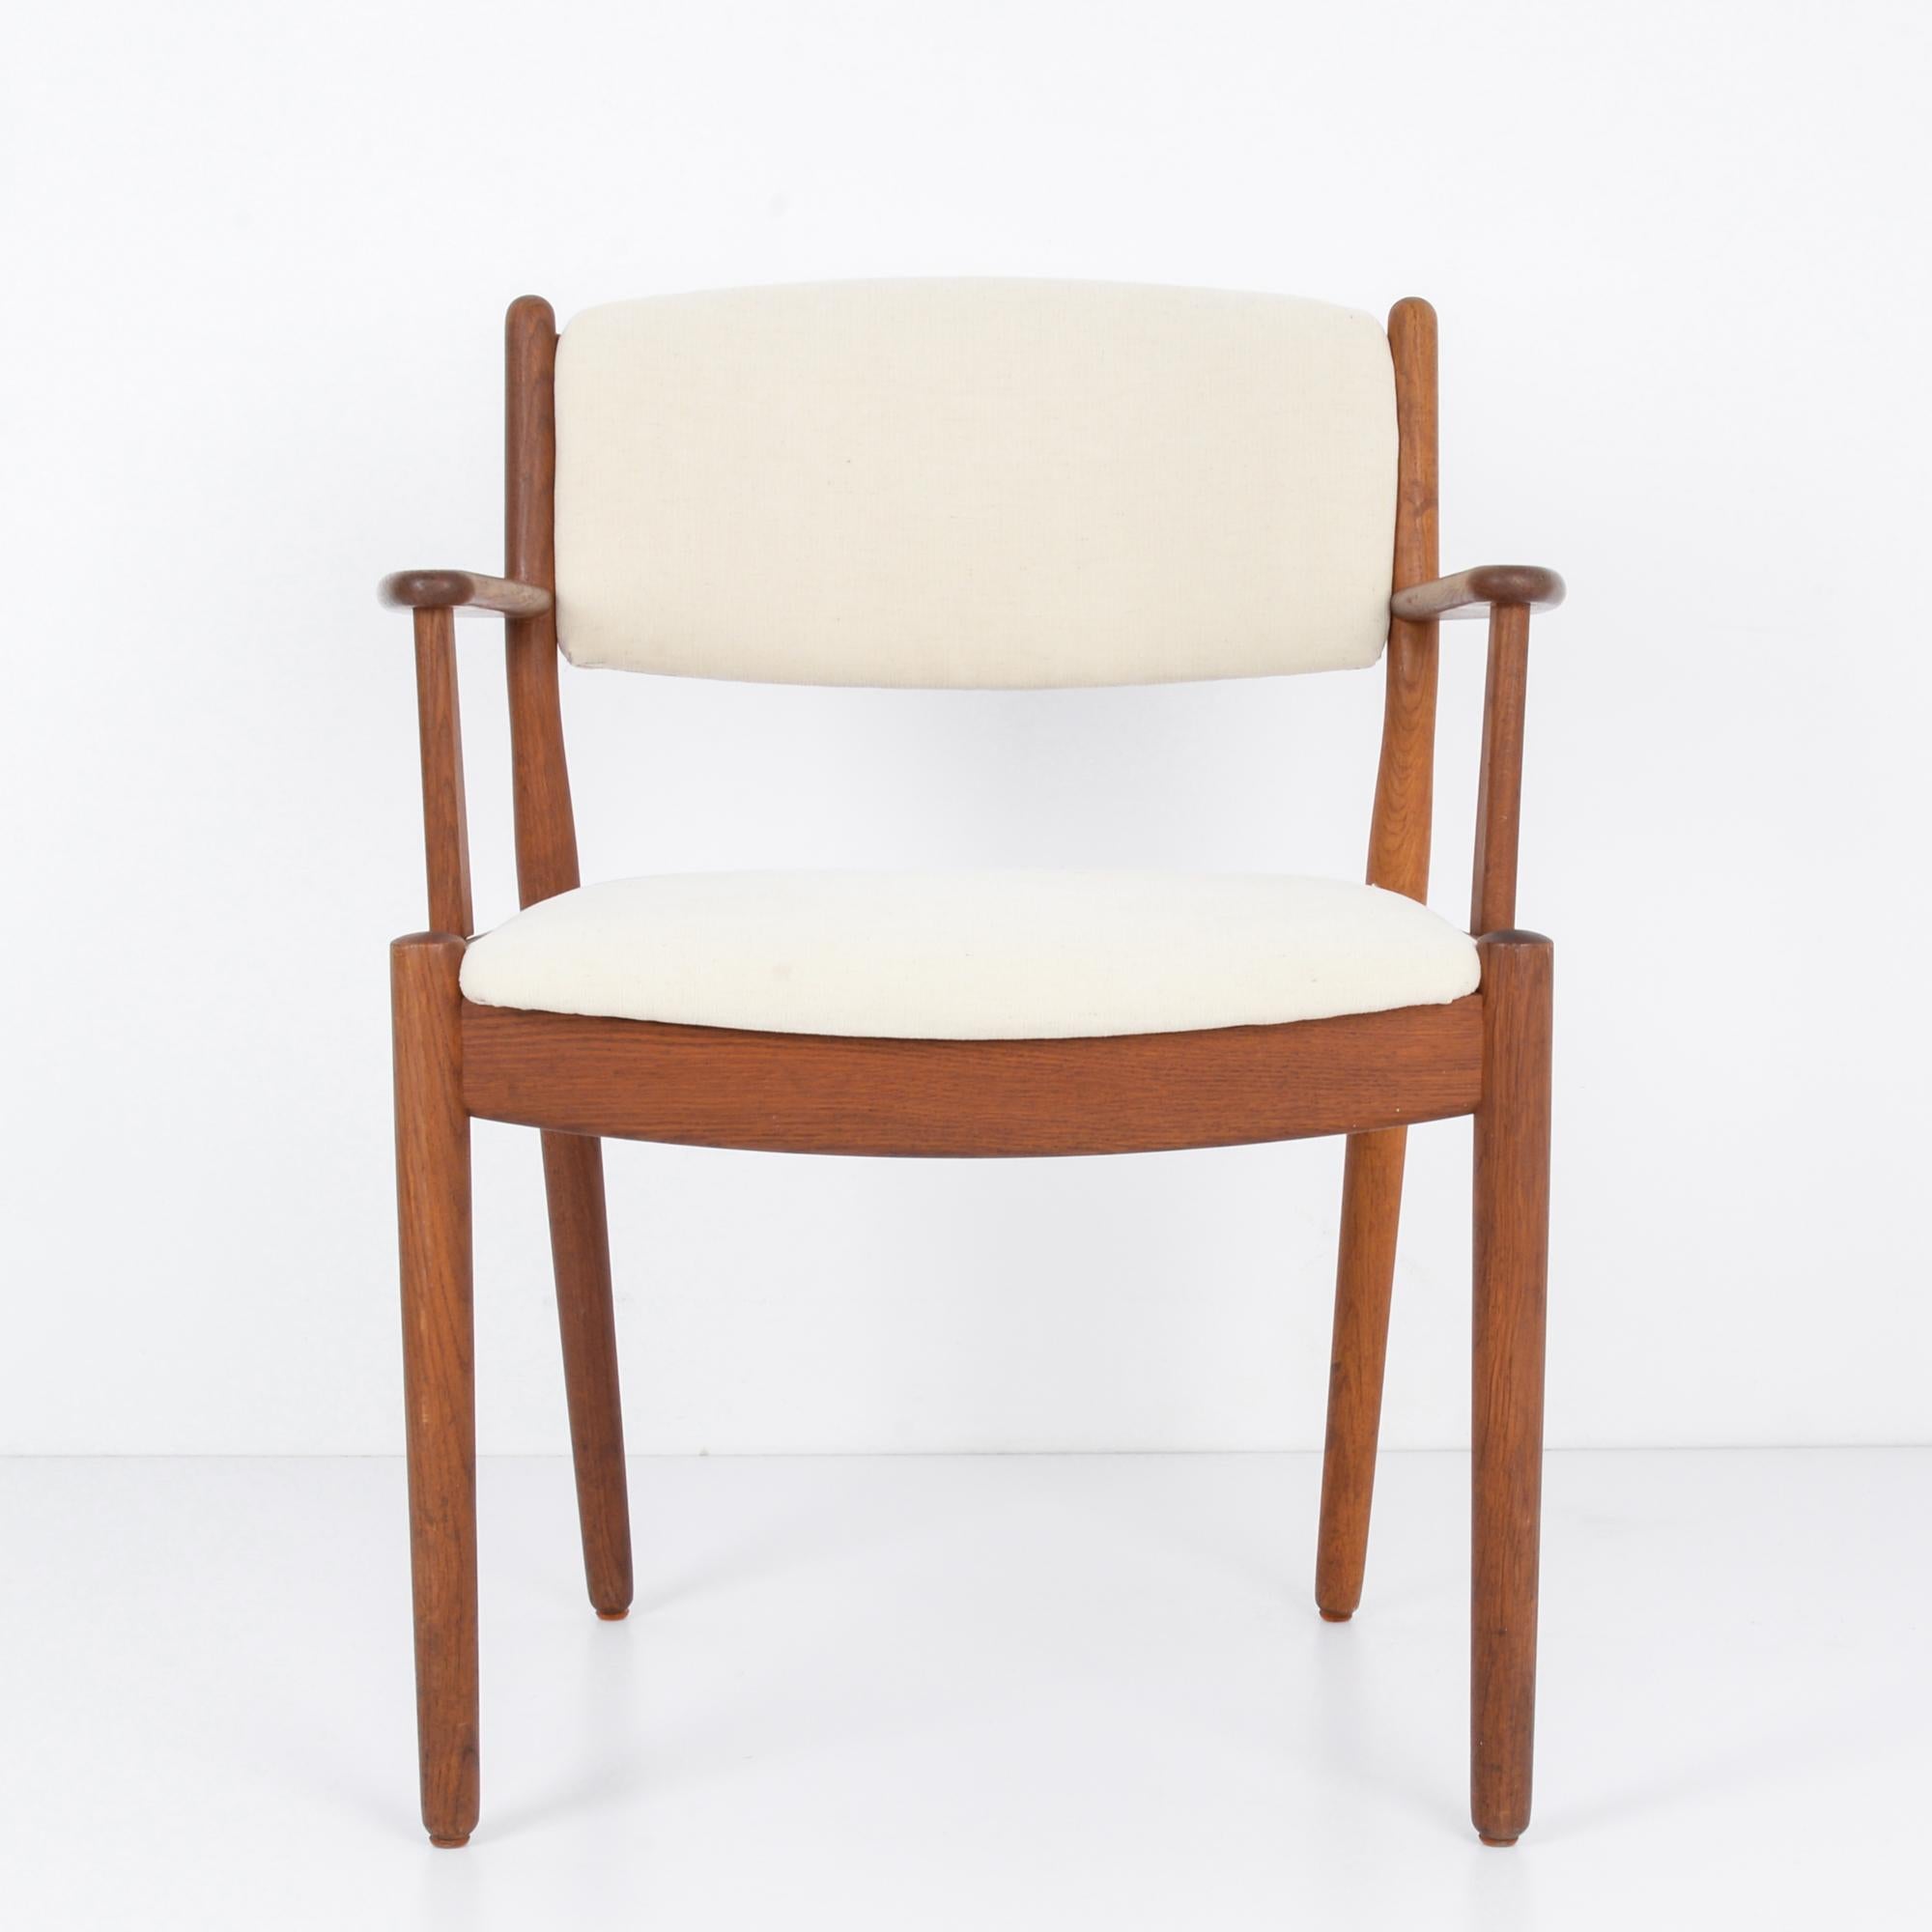 This wooden armchair with an upholstered seat and back was made in Denmark, circa 1960. Designed in the Danish modern style, the chair emphasizes function, comfort, and warmth. It features a wide seat, slightly tapered legs, and angular armrests.